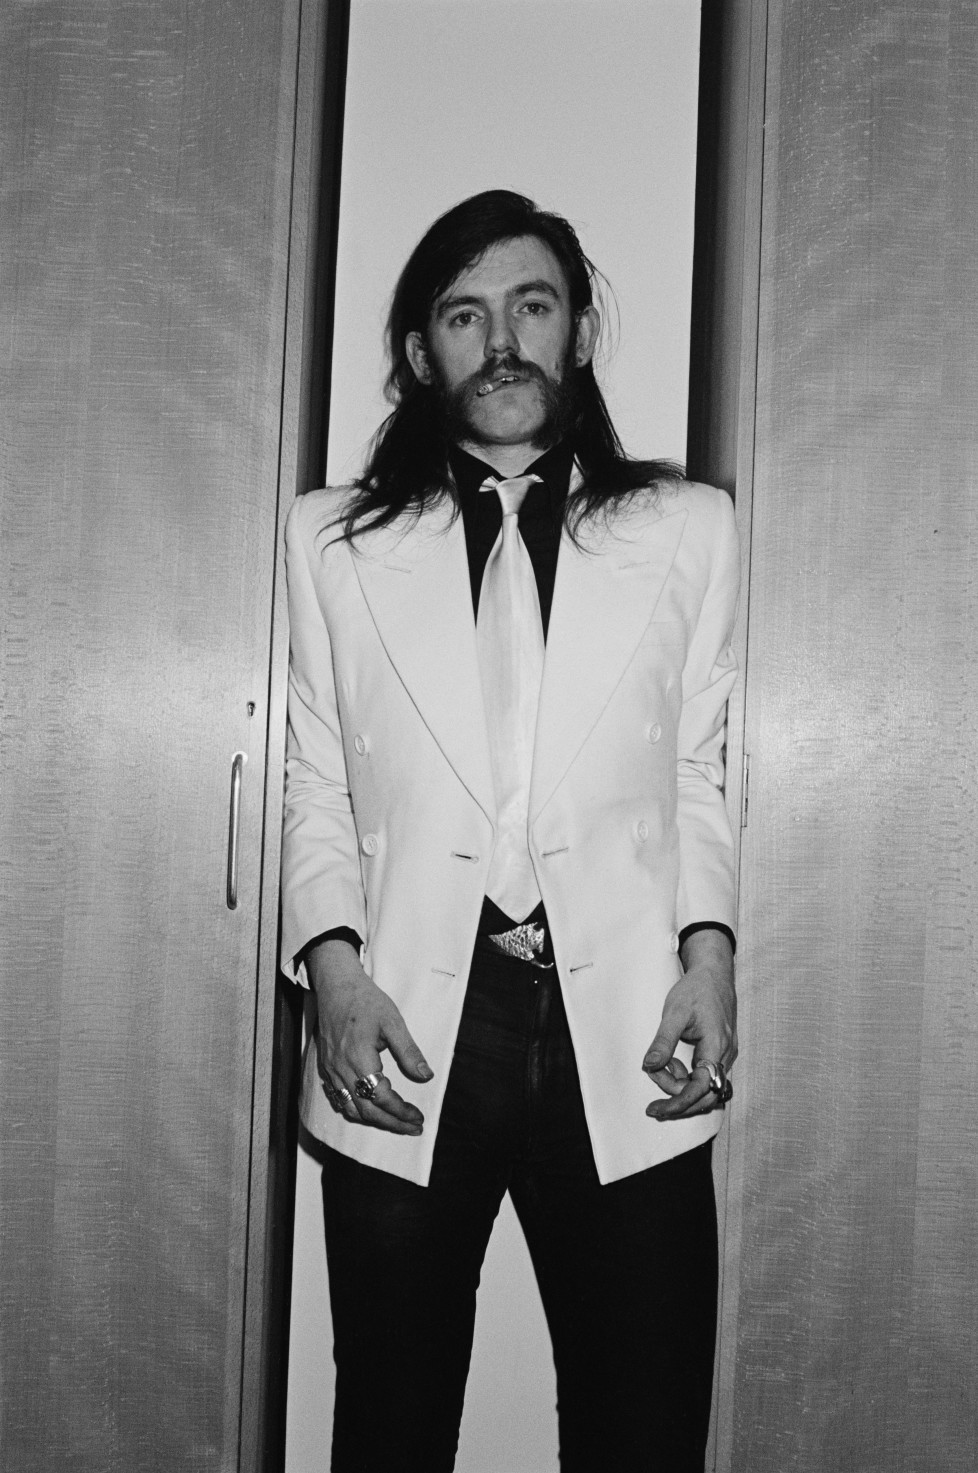 LONDON - FEBRUARY 01: singer and bassist Lemmy Kilmister from Motorhead posed backstage at Top Of The Pops TV Studios in London in February 1981. (Photo by Fin Costello/Redferns)